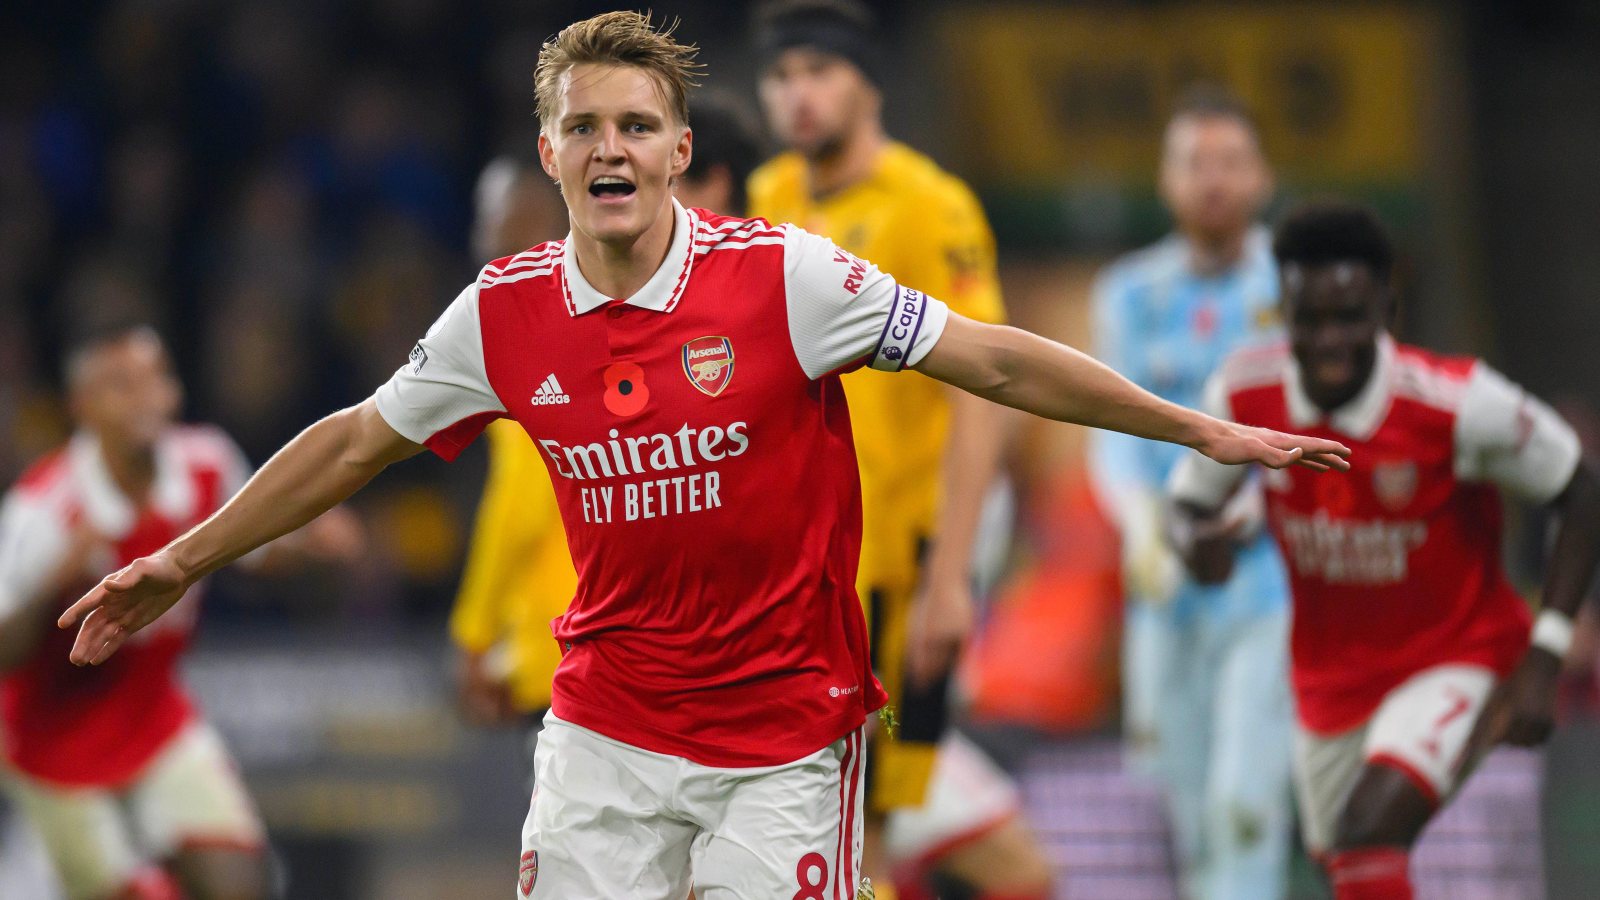 EPL: Arsenal Overcome Wolves, Move 5 Points Clear Over Man City